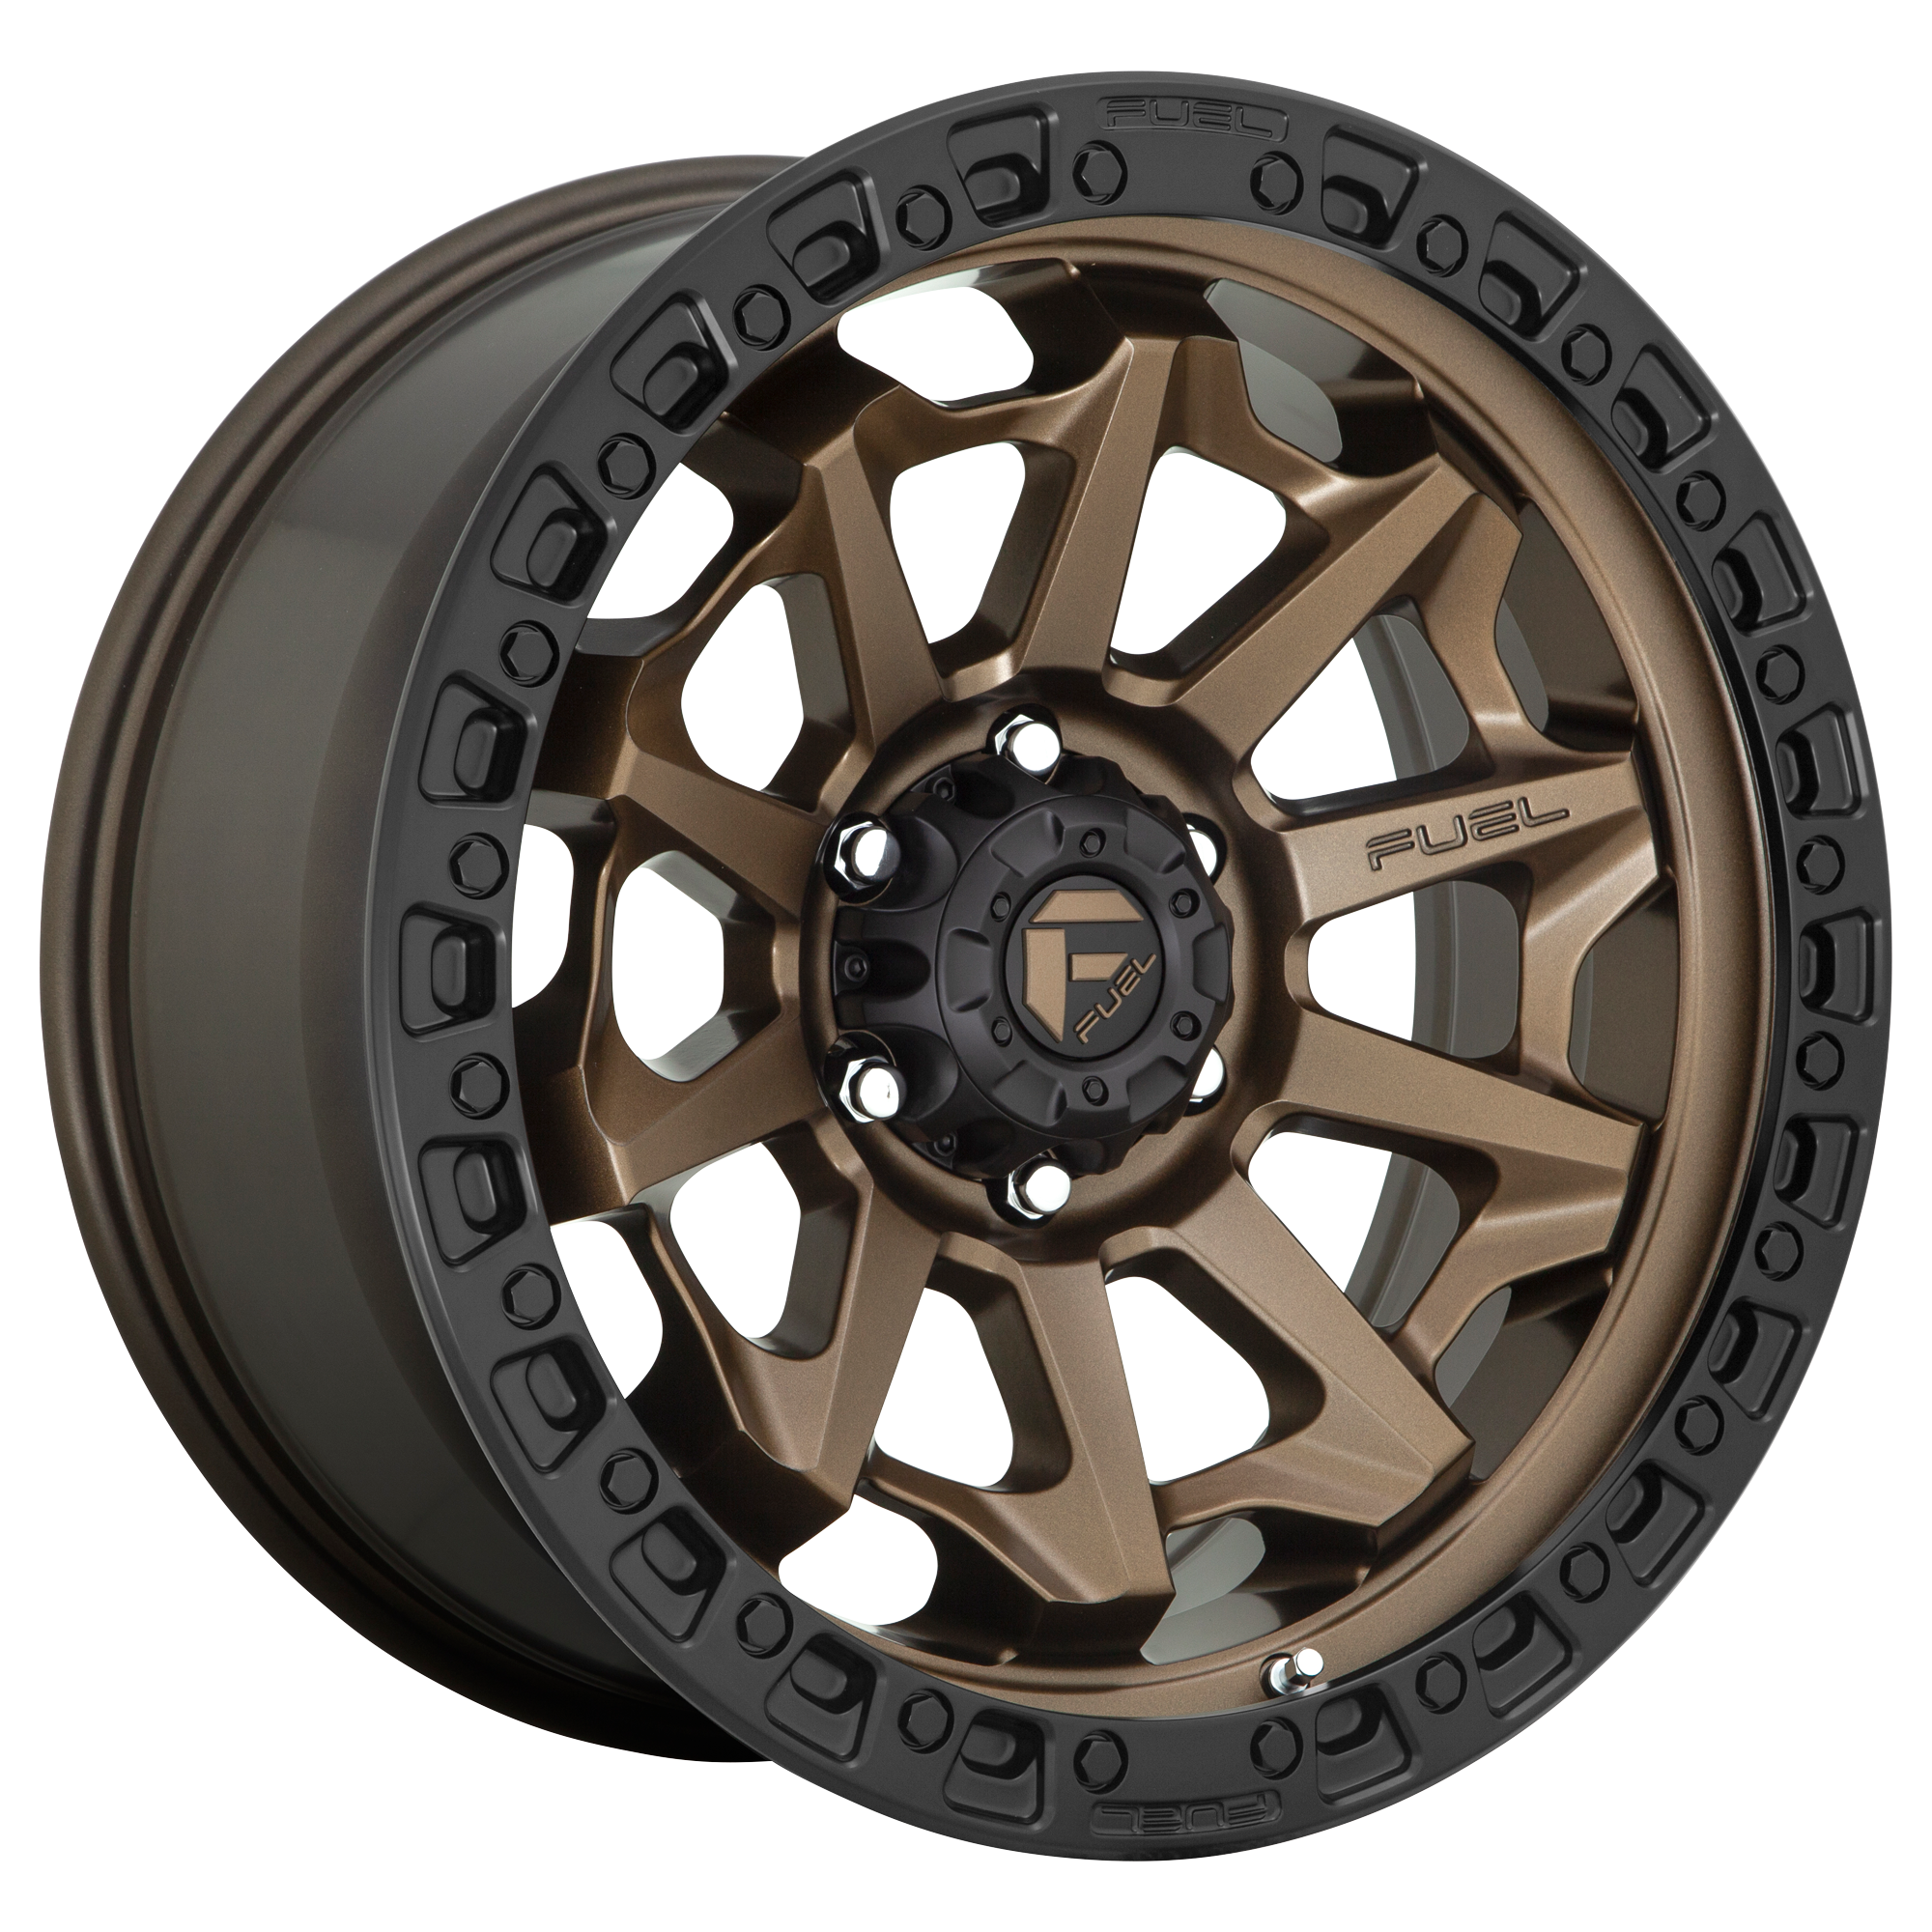 COVERT 17x9 5x127.00 MATTE BRONZE BLACK BEAD RING (-12 mm) - Tires and Engine Performance